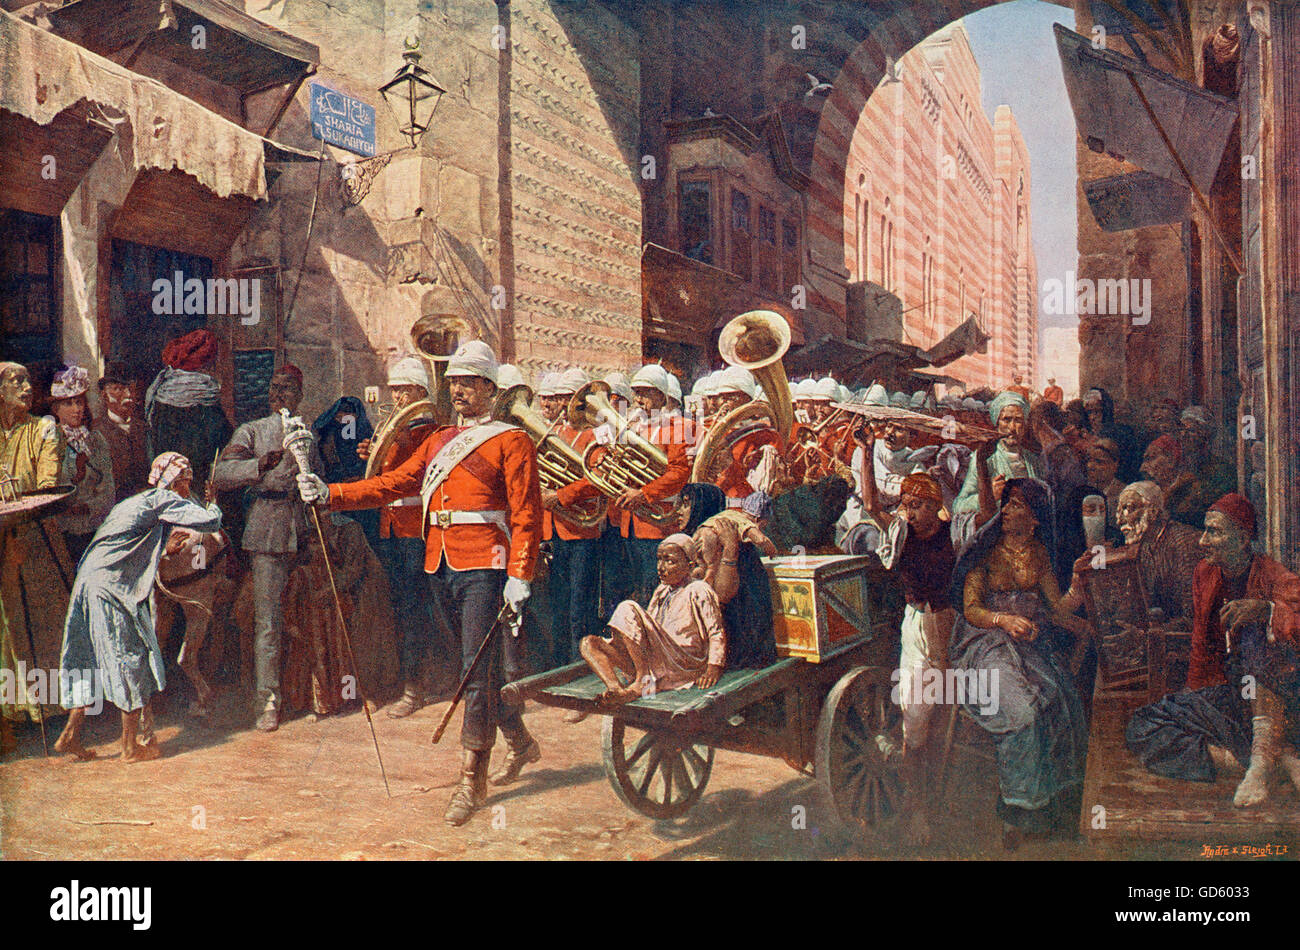 A friendly power in Egypt, after the  painting by W.C. Horsley. The 41st Welsh regiment  marching through the Metwali gate in Cairo, Egypt in the 19th century. Stock Photo